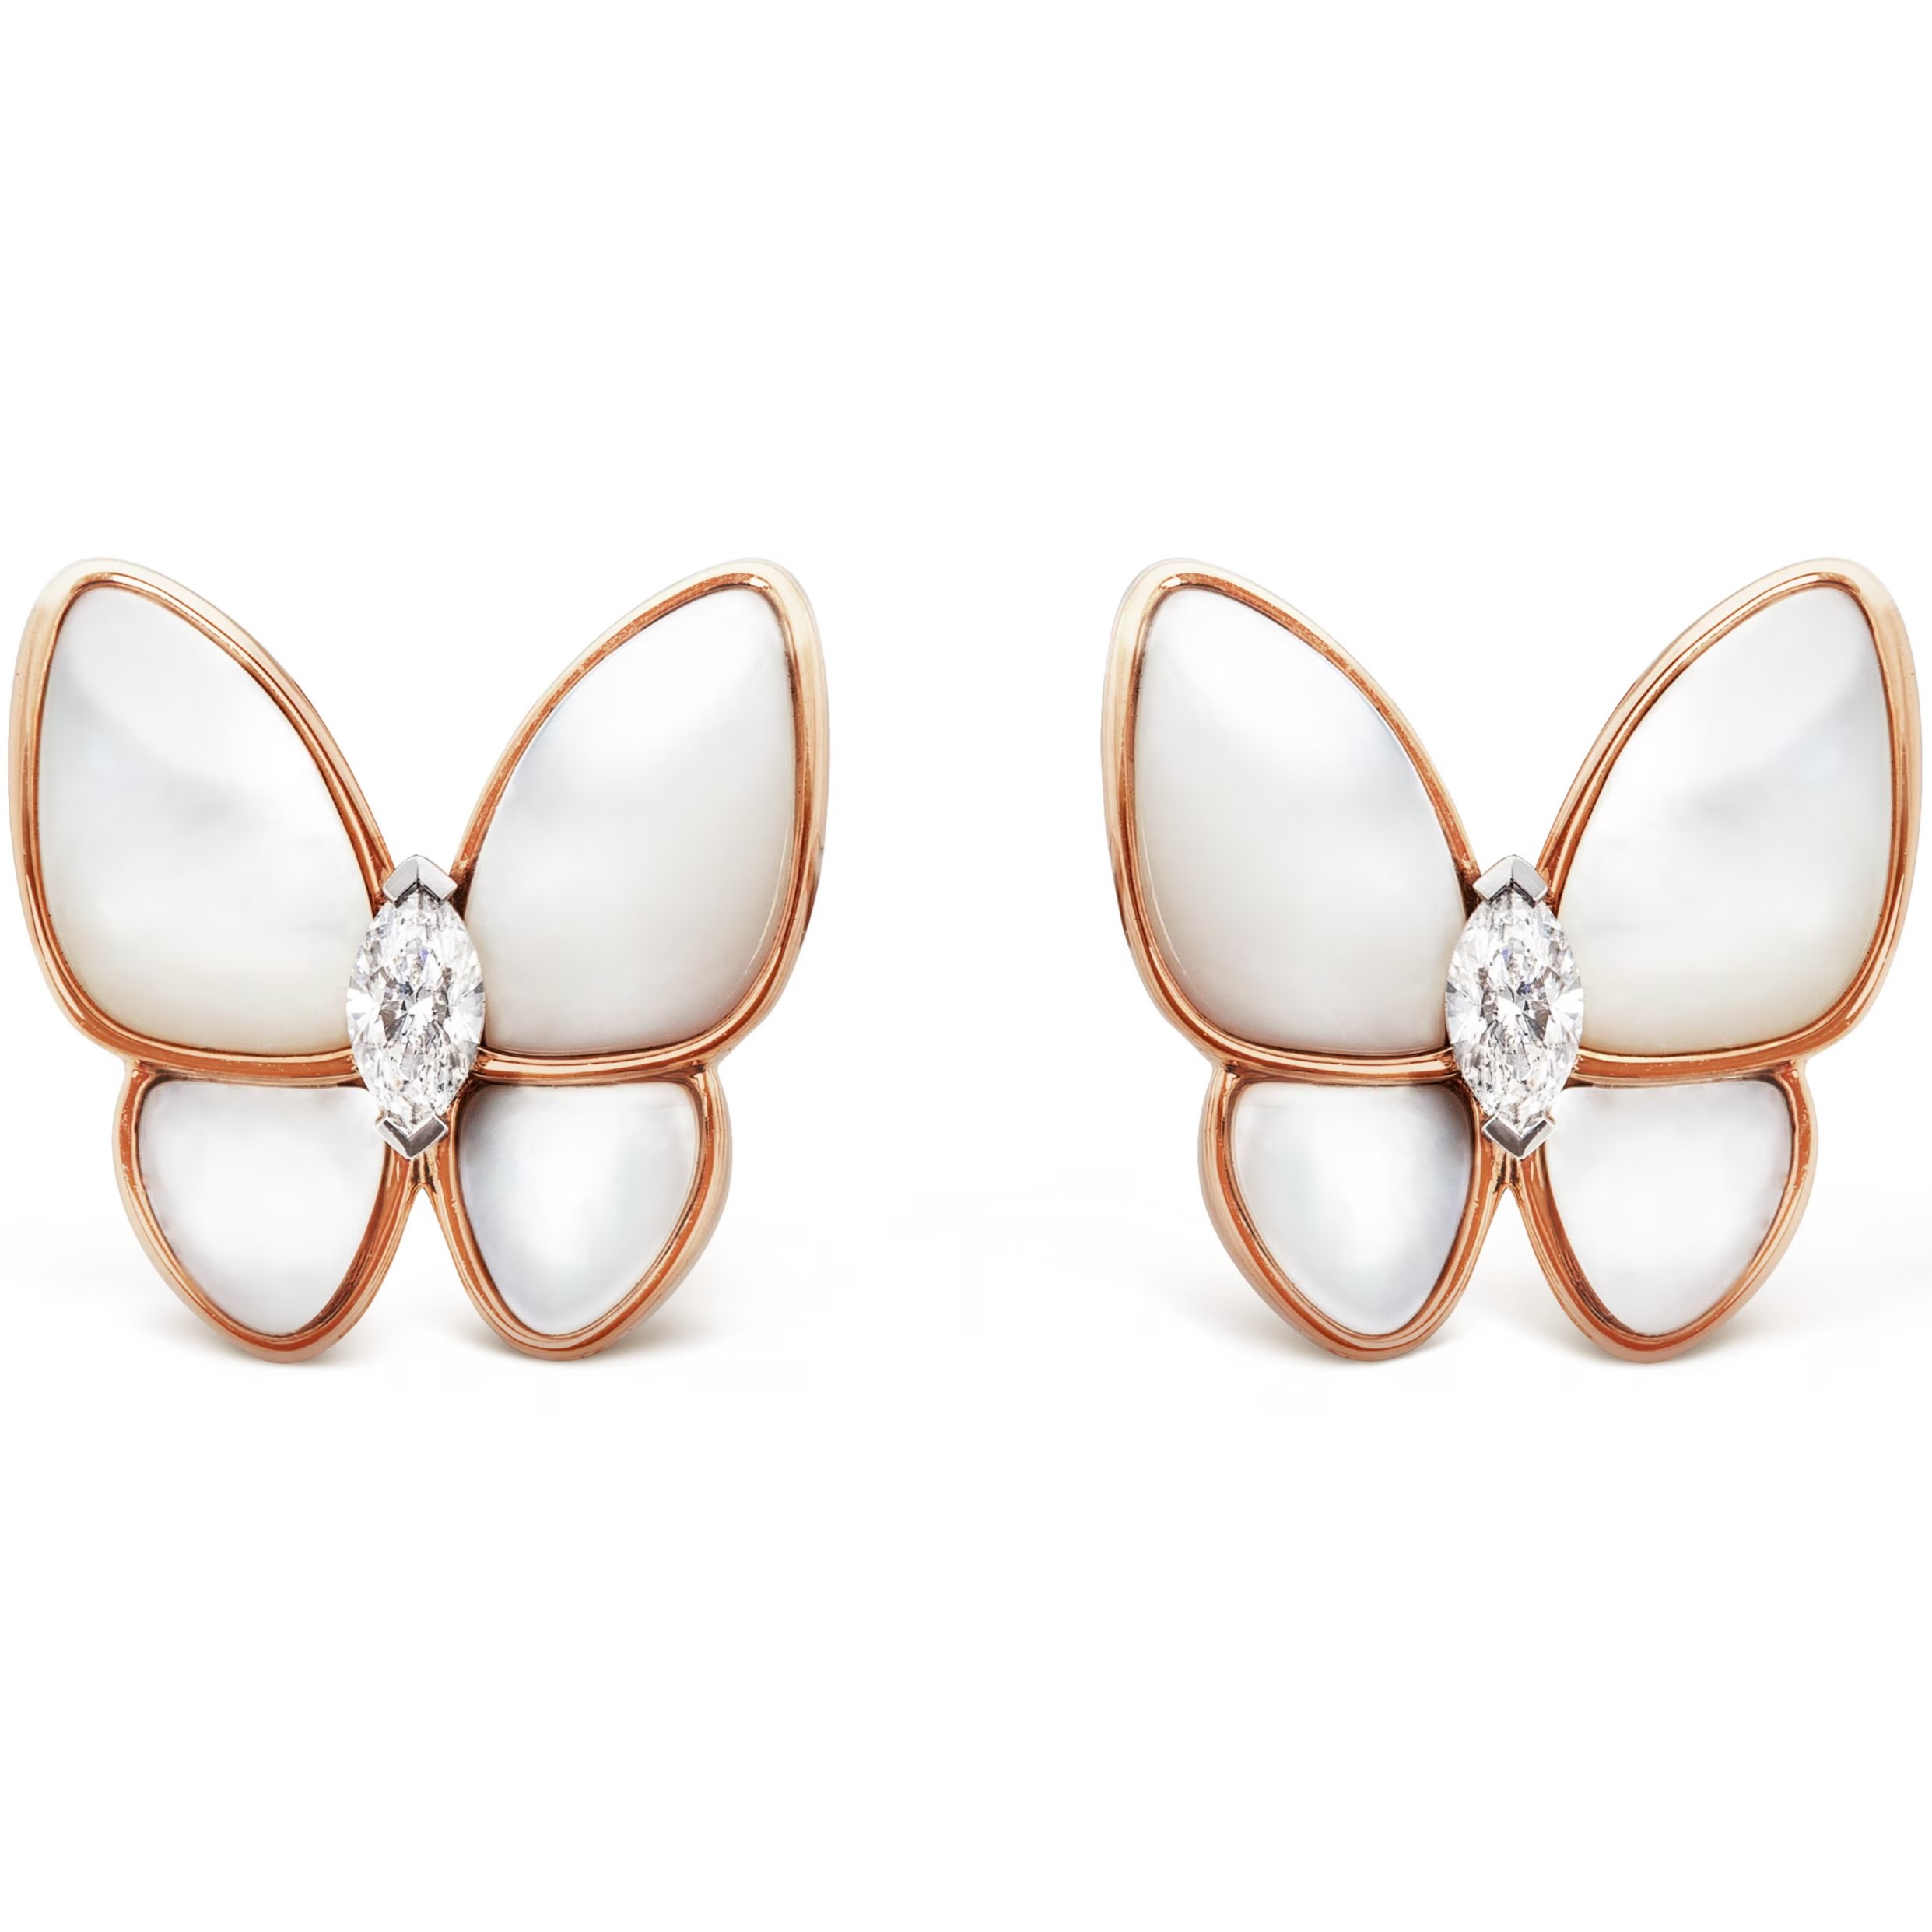 HOA TAI BƯỚM TRẮNG VAN CLEEF & ARPELS TWO BUTTERFLY EARRINGS ROSE GOLD WHITE MOTHER OF PEARL ROUND DIAMOND RHODIUM PLATED VCARO8FN00 2